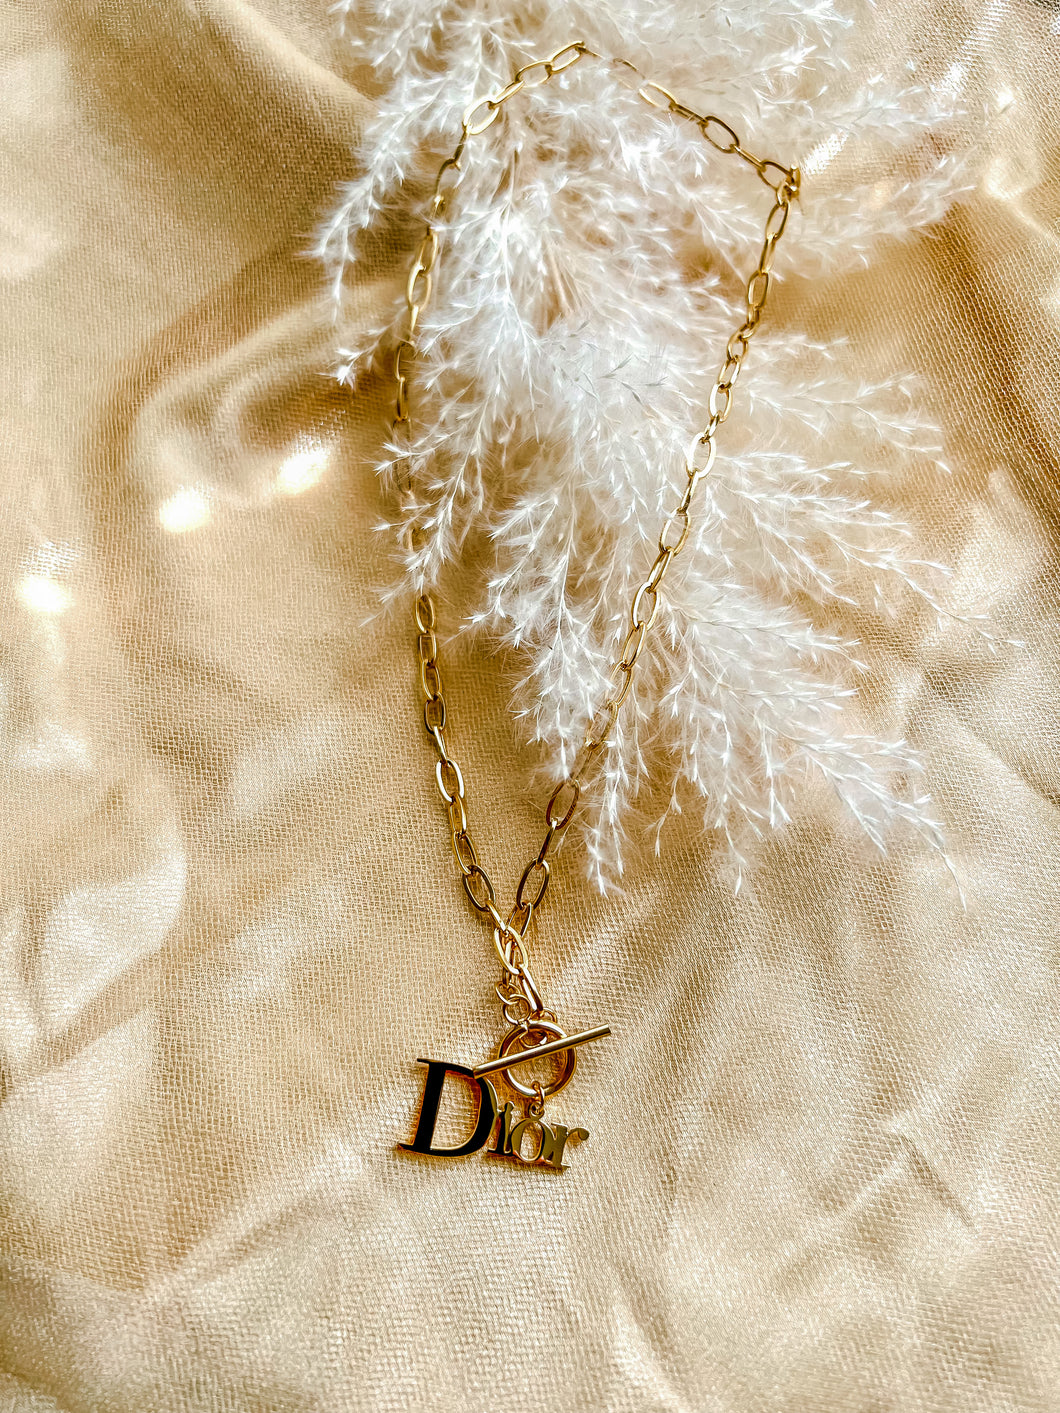 Dior me gold necklace